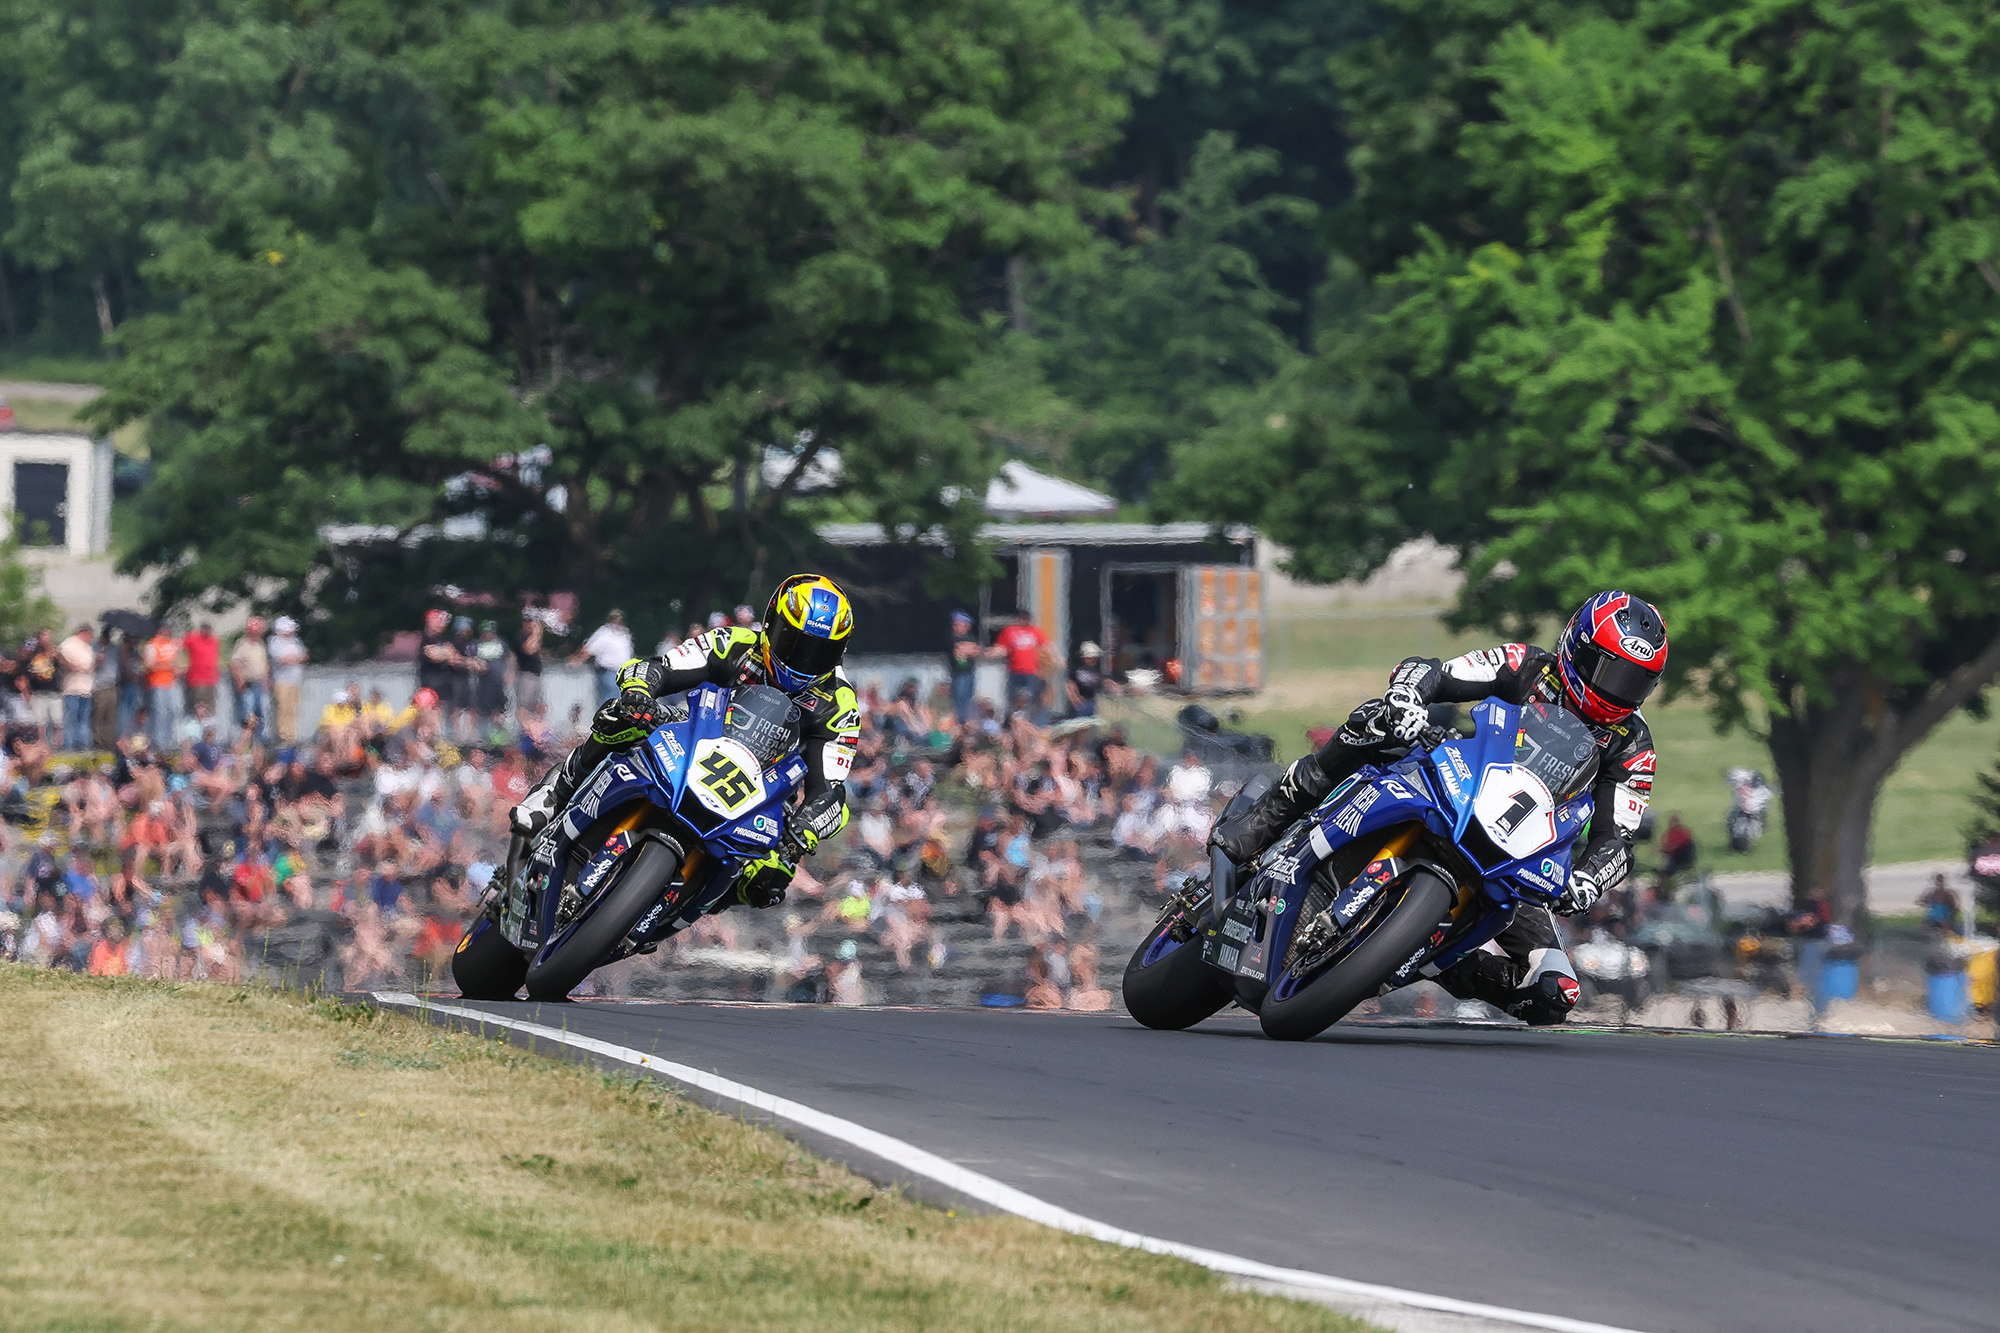 Gagne Reclaims Superbike Points Lead with Road America Podium
Finish image